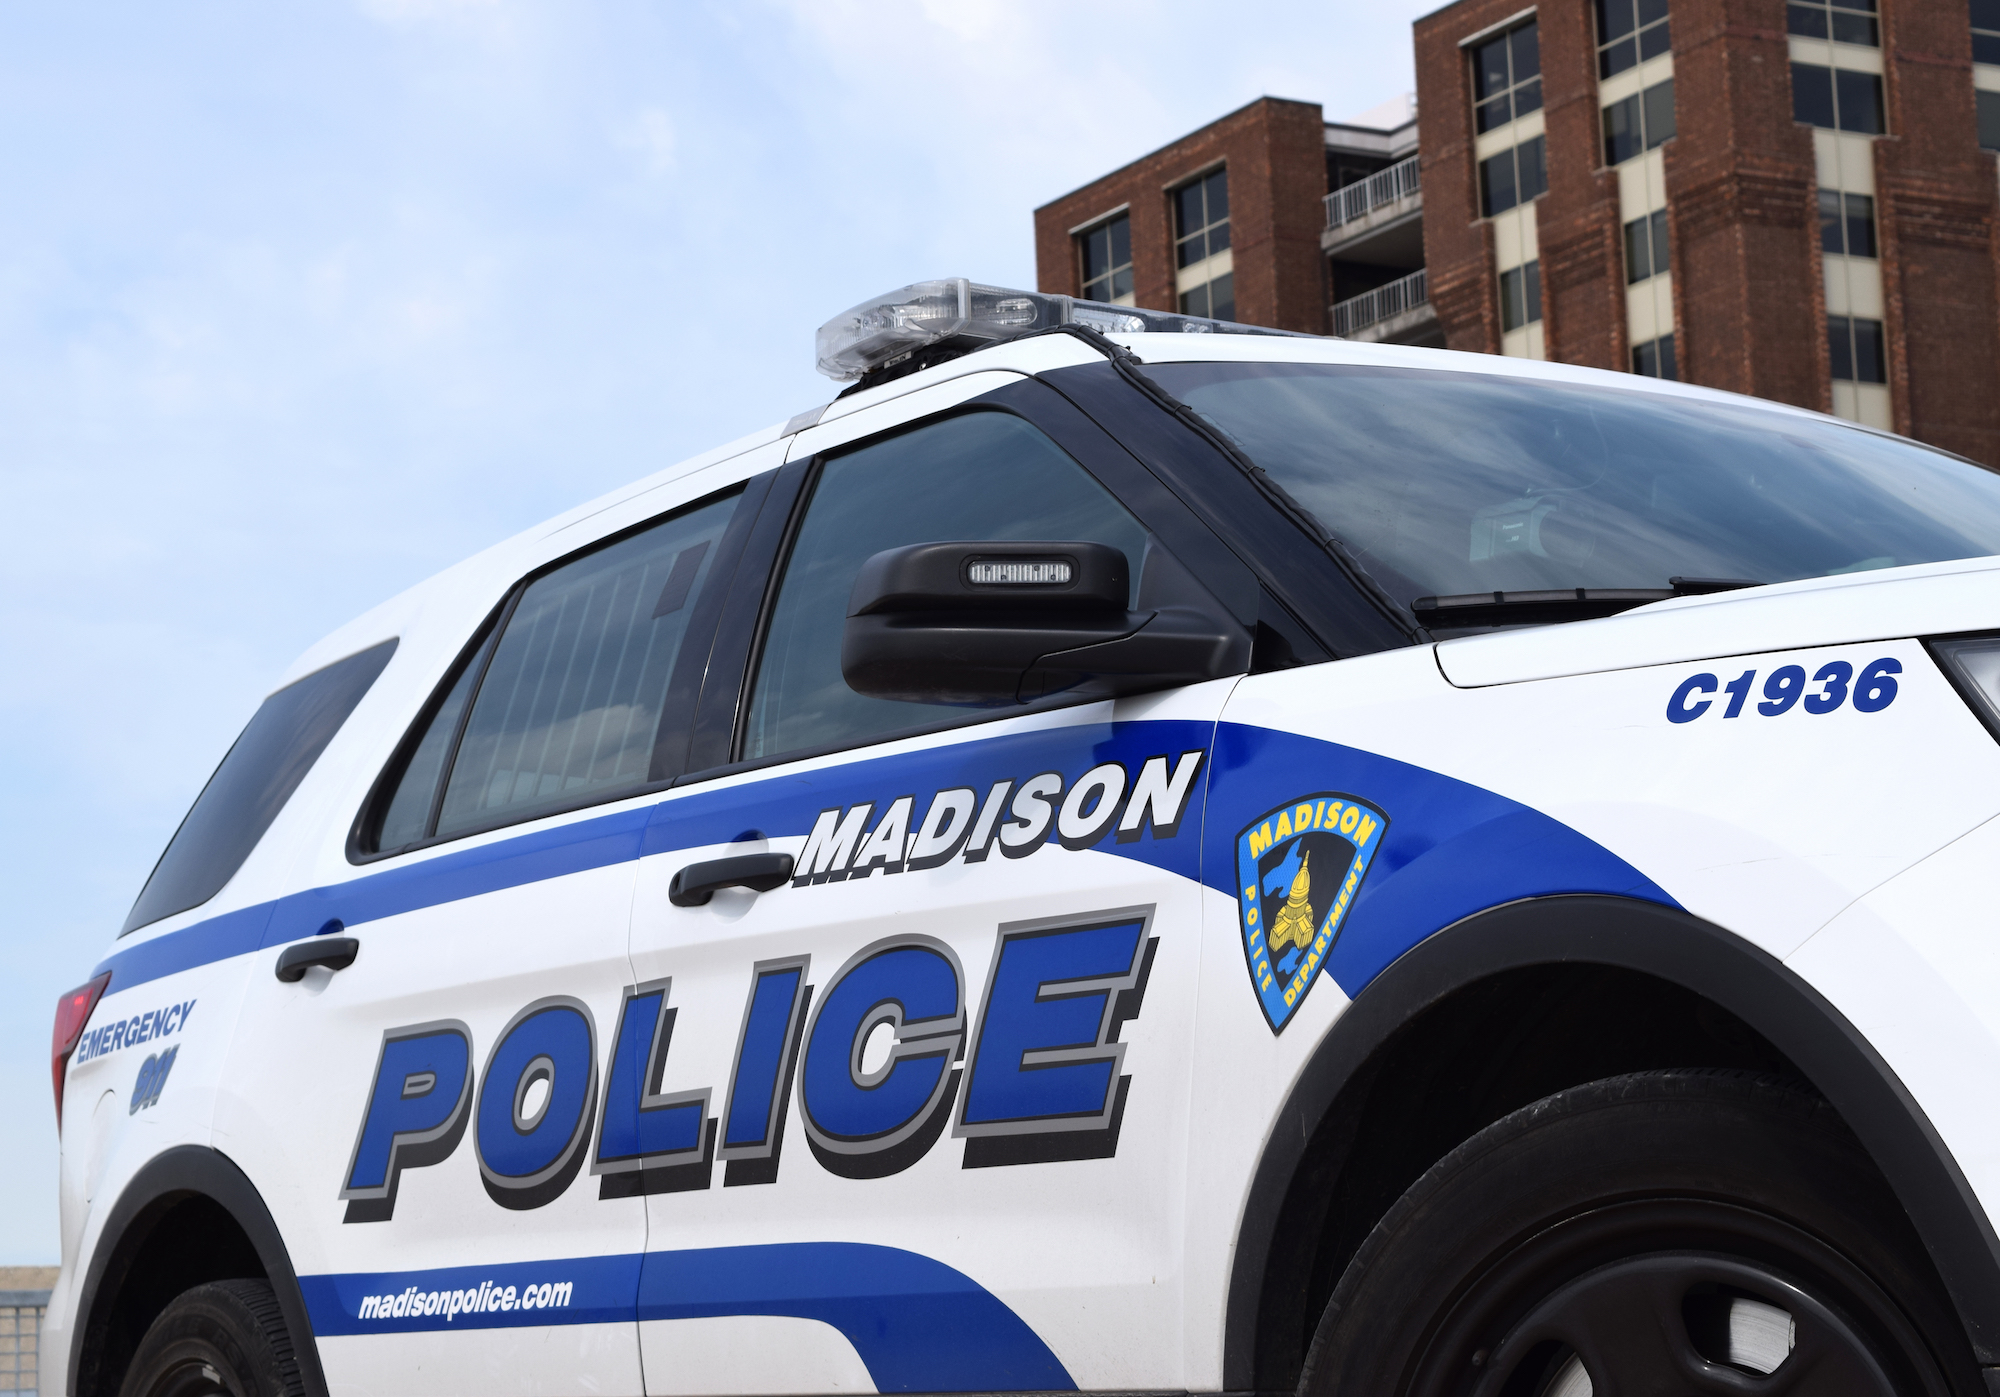 Madison Police Department car